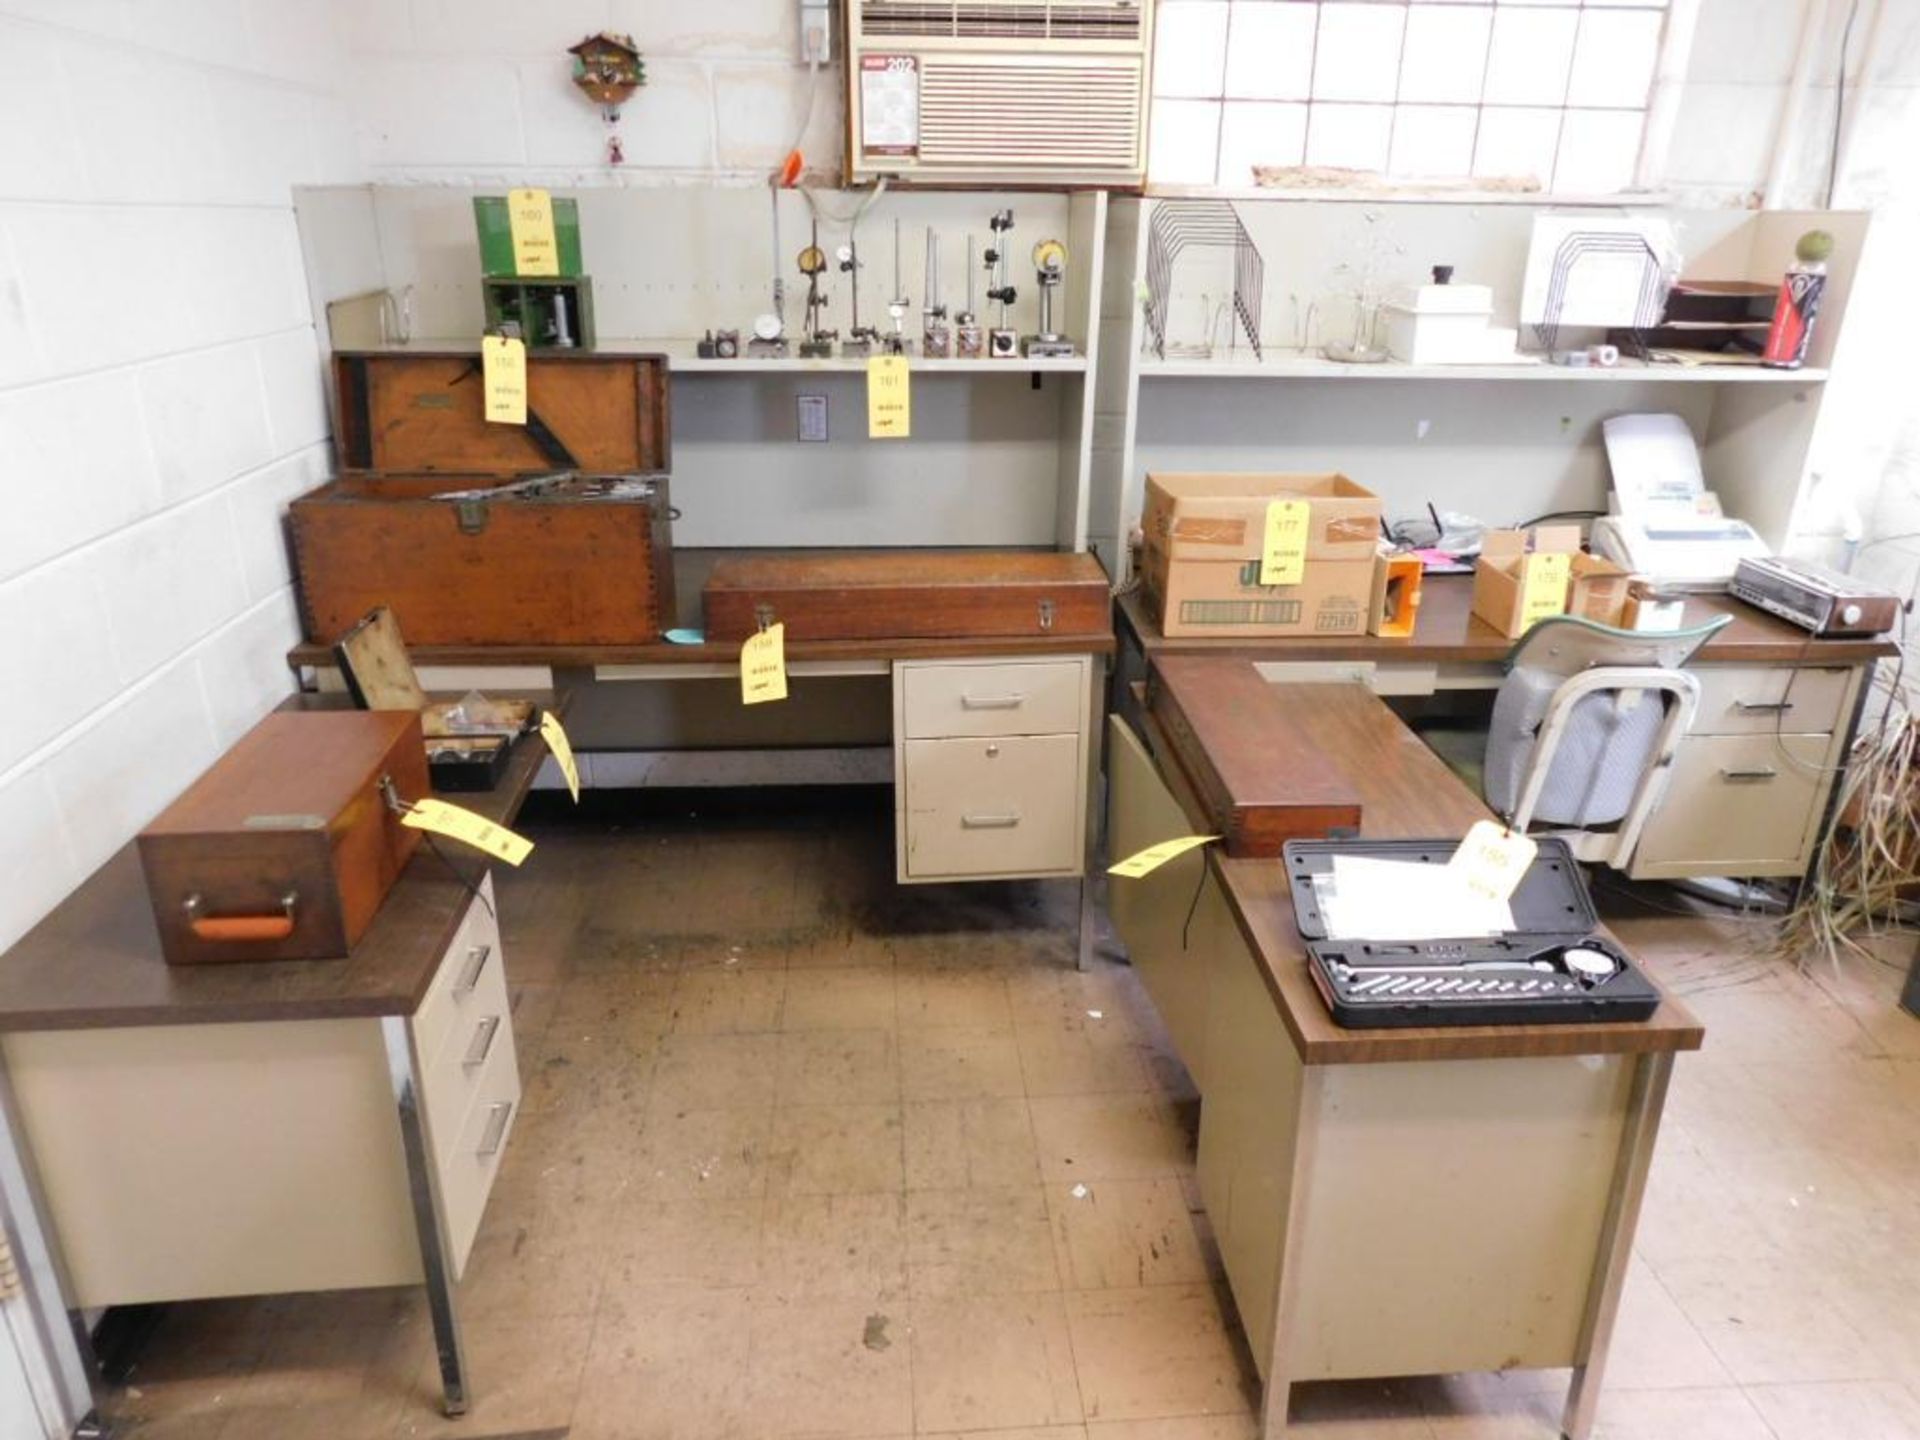 LOT: Contents of Front Office: (4) Assorted Desks, Filing Cabinets, Microwave, Fan, (2) Dehumidifier